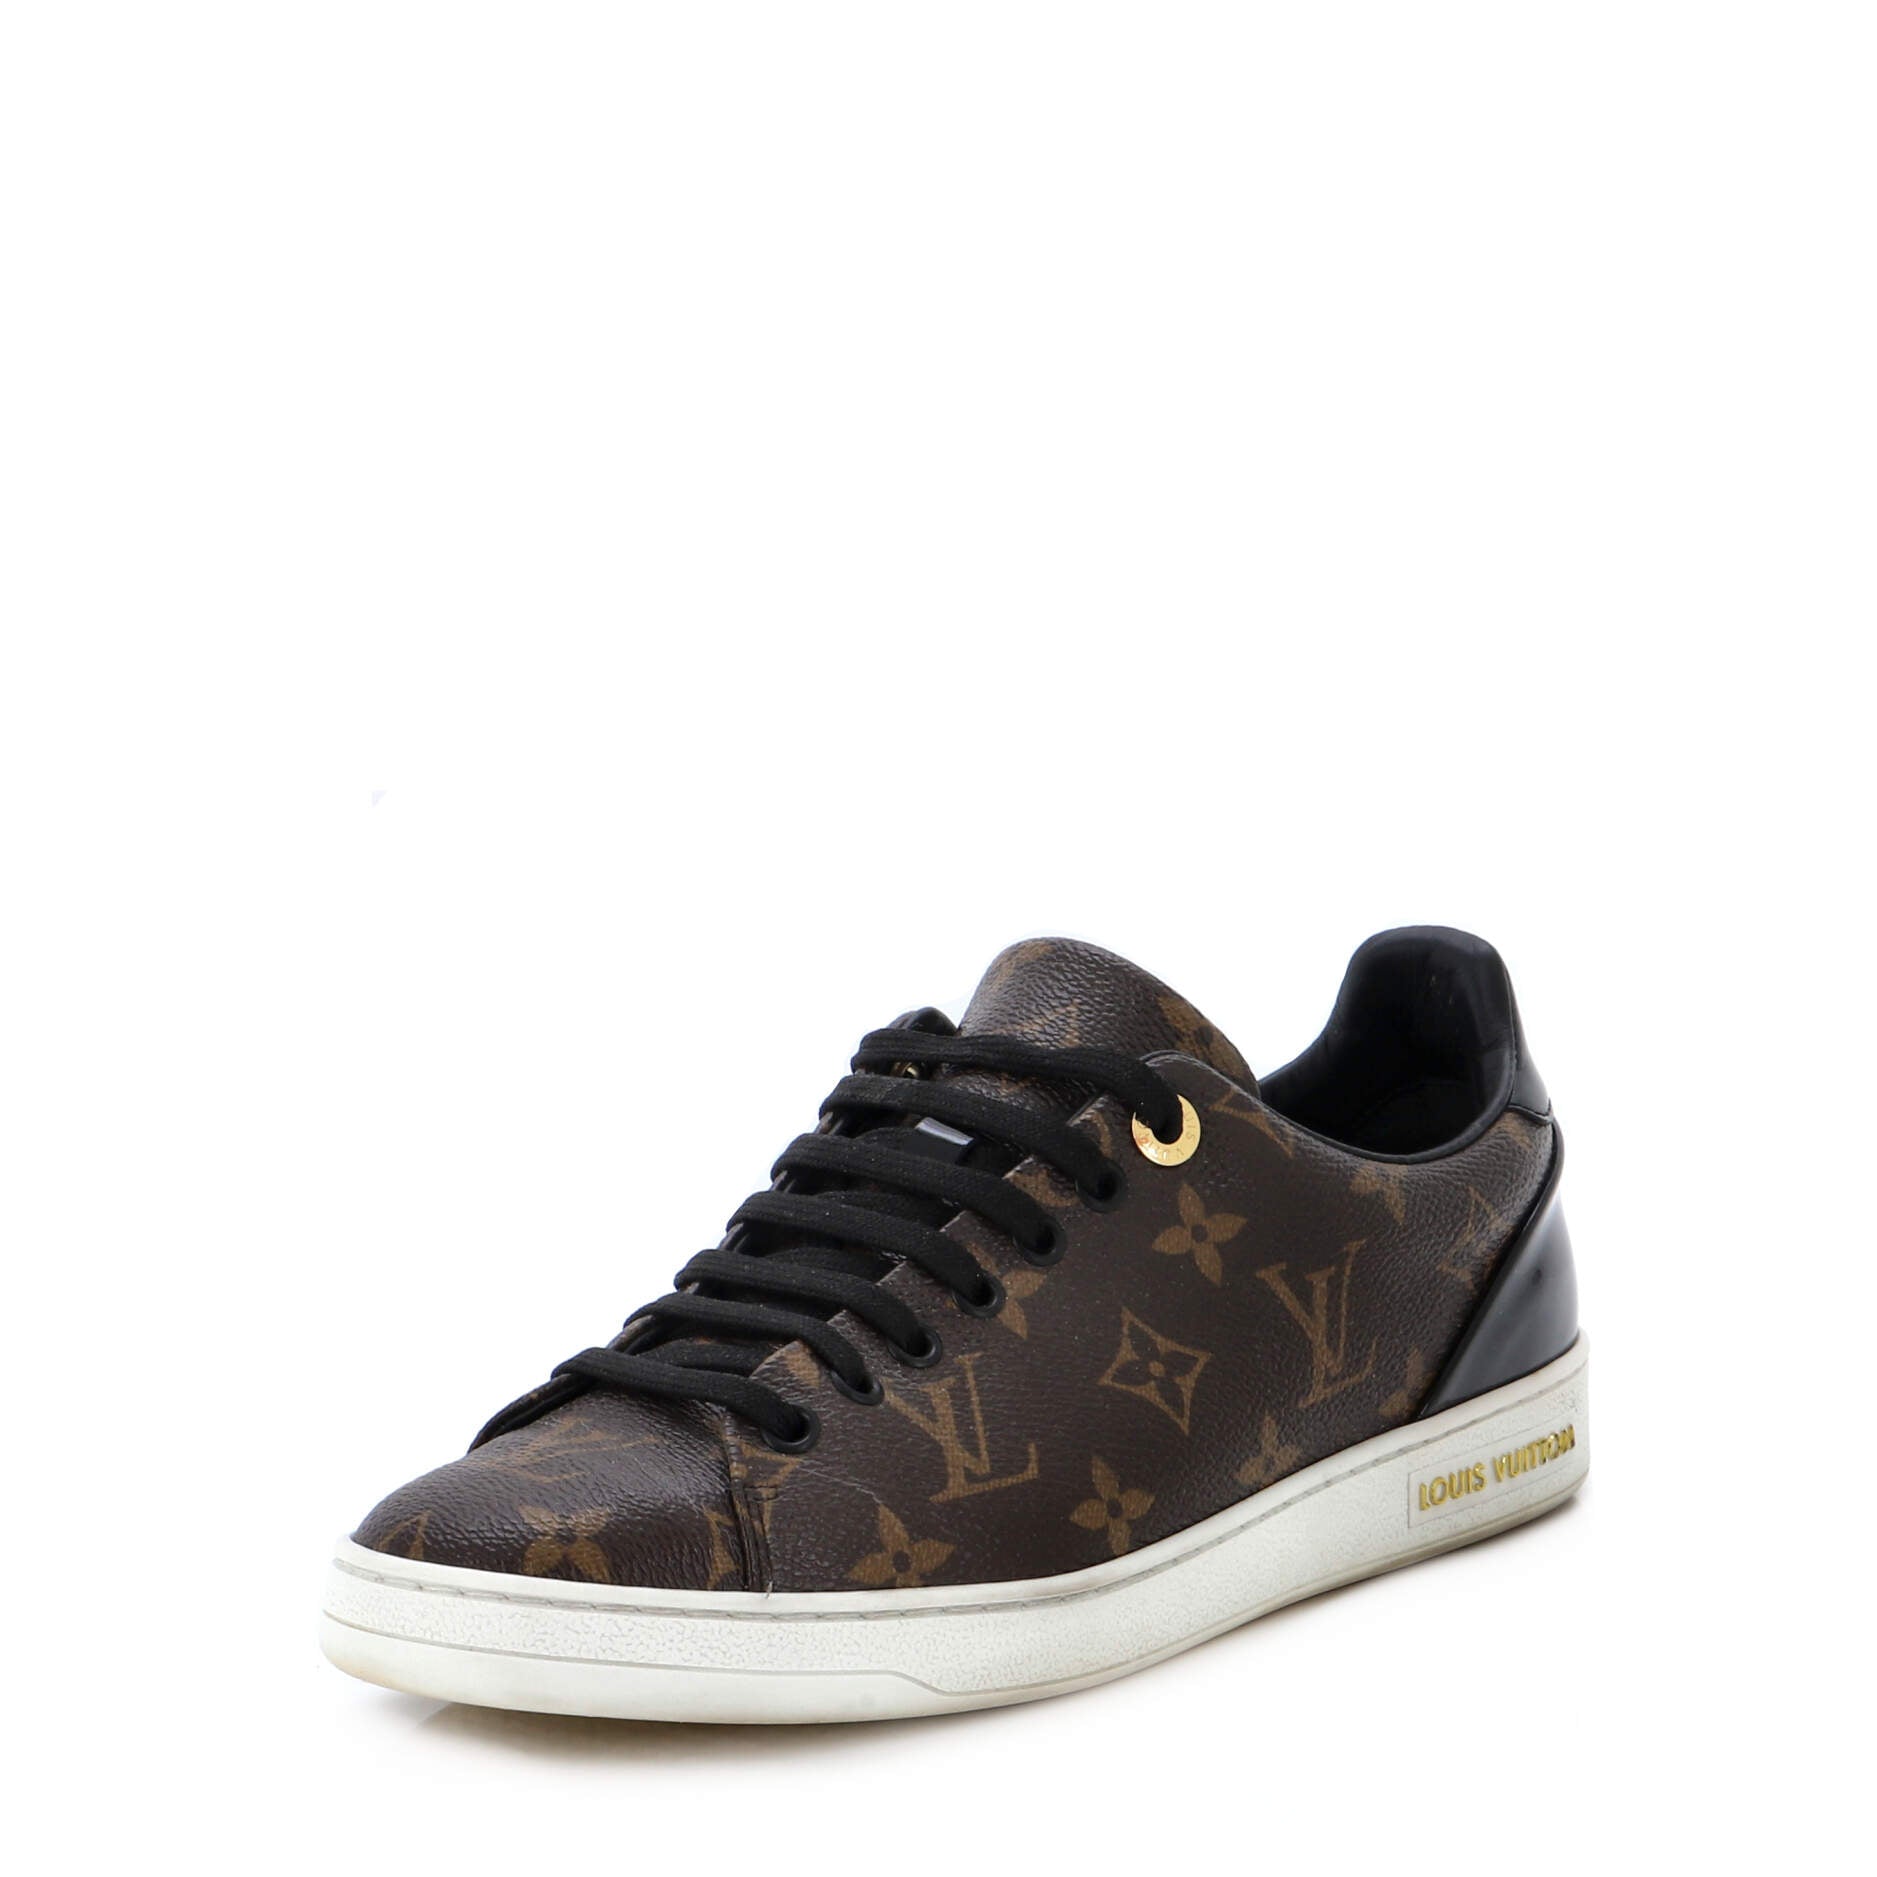 Louis Vuitton Women's Time Out Sneakers Wild at Heart Monogram Print  Leather Print 13599368